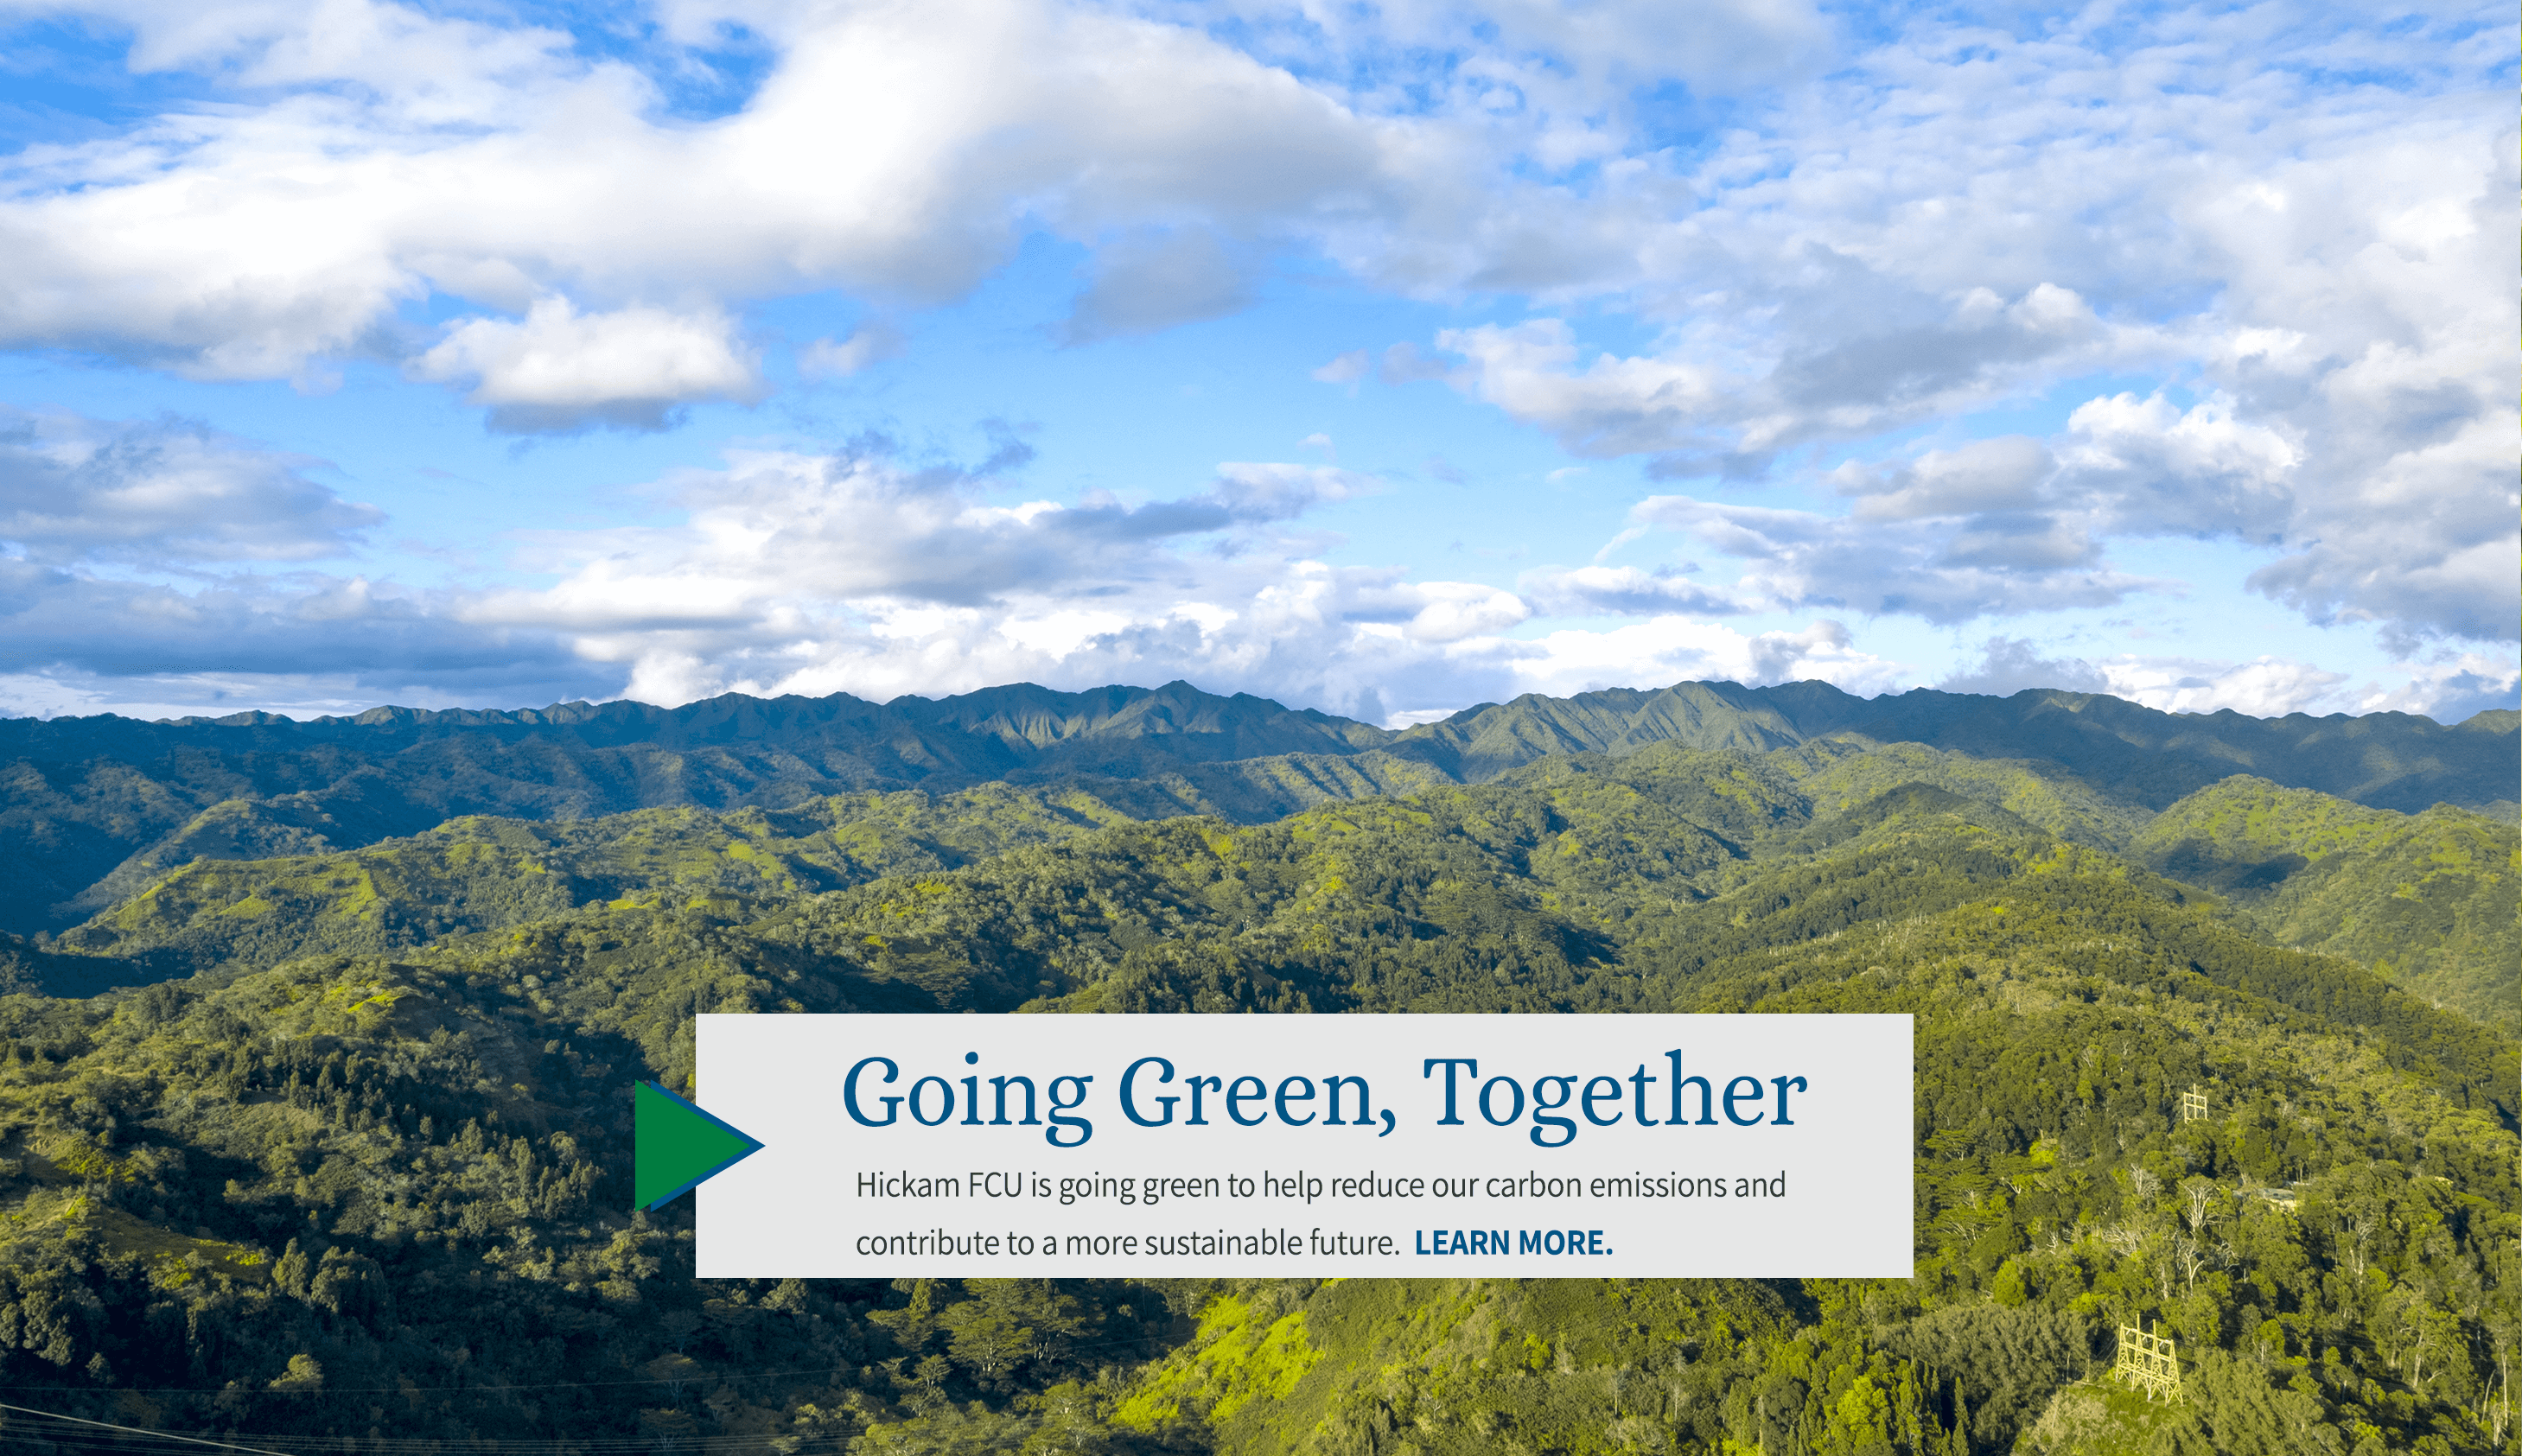 Hickam FCU is going green to help reduce our carbon emissions and contribute to a more sustainable future. Learn more.